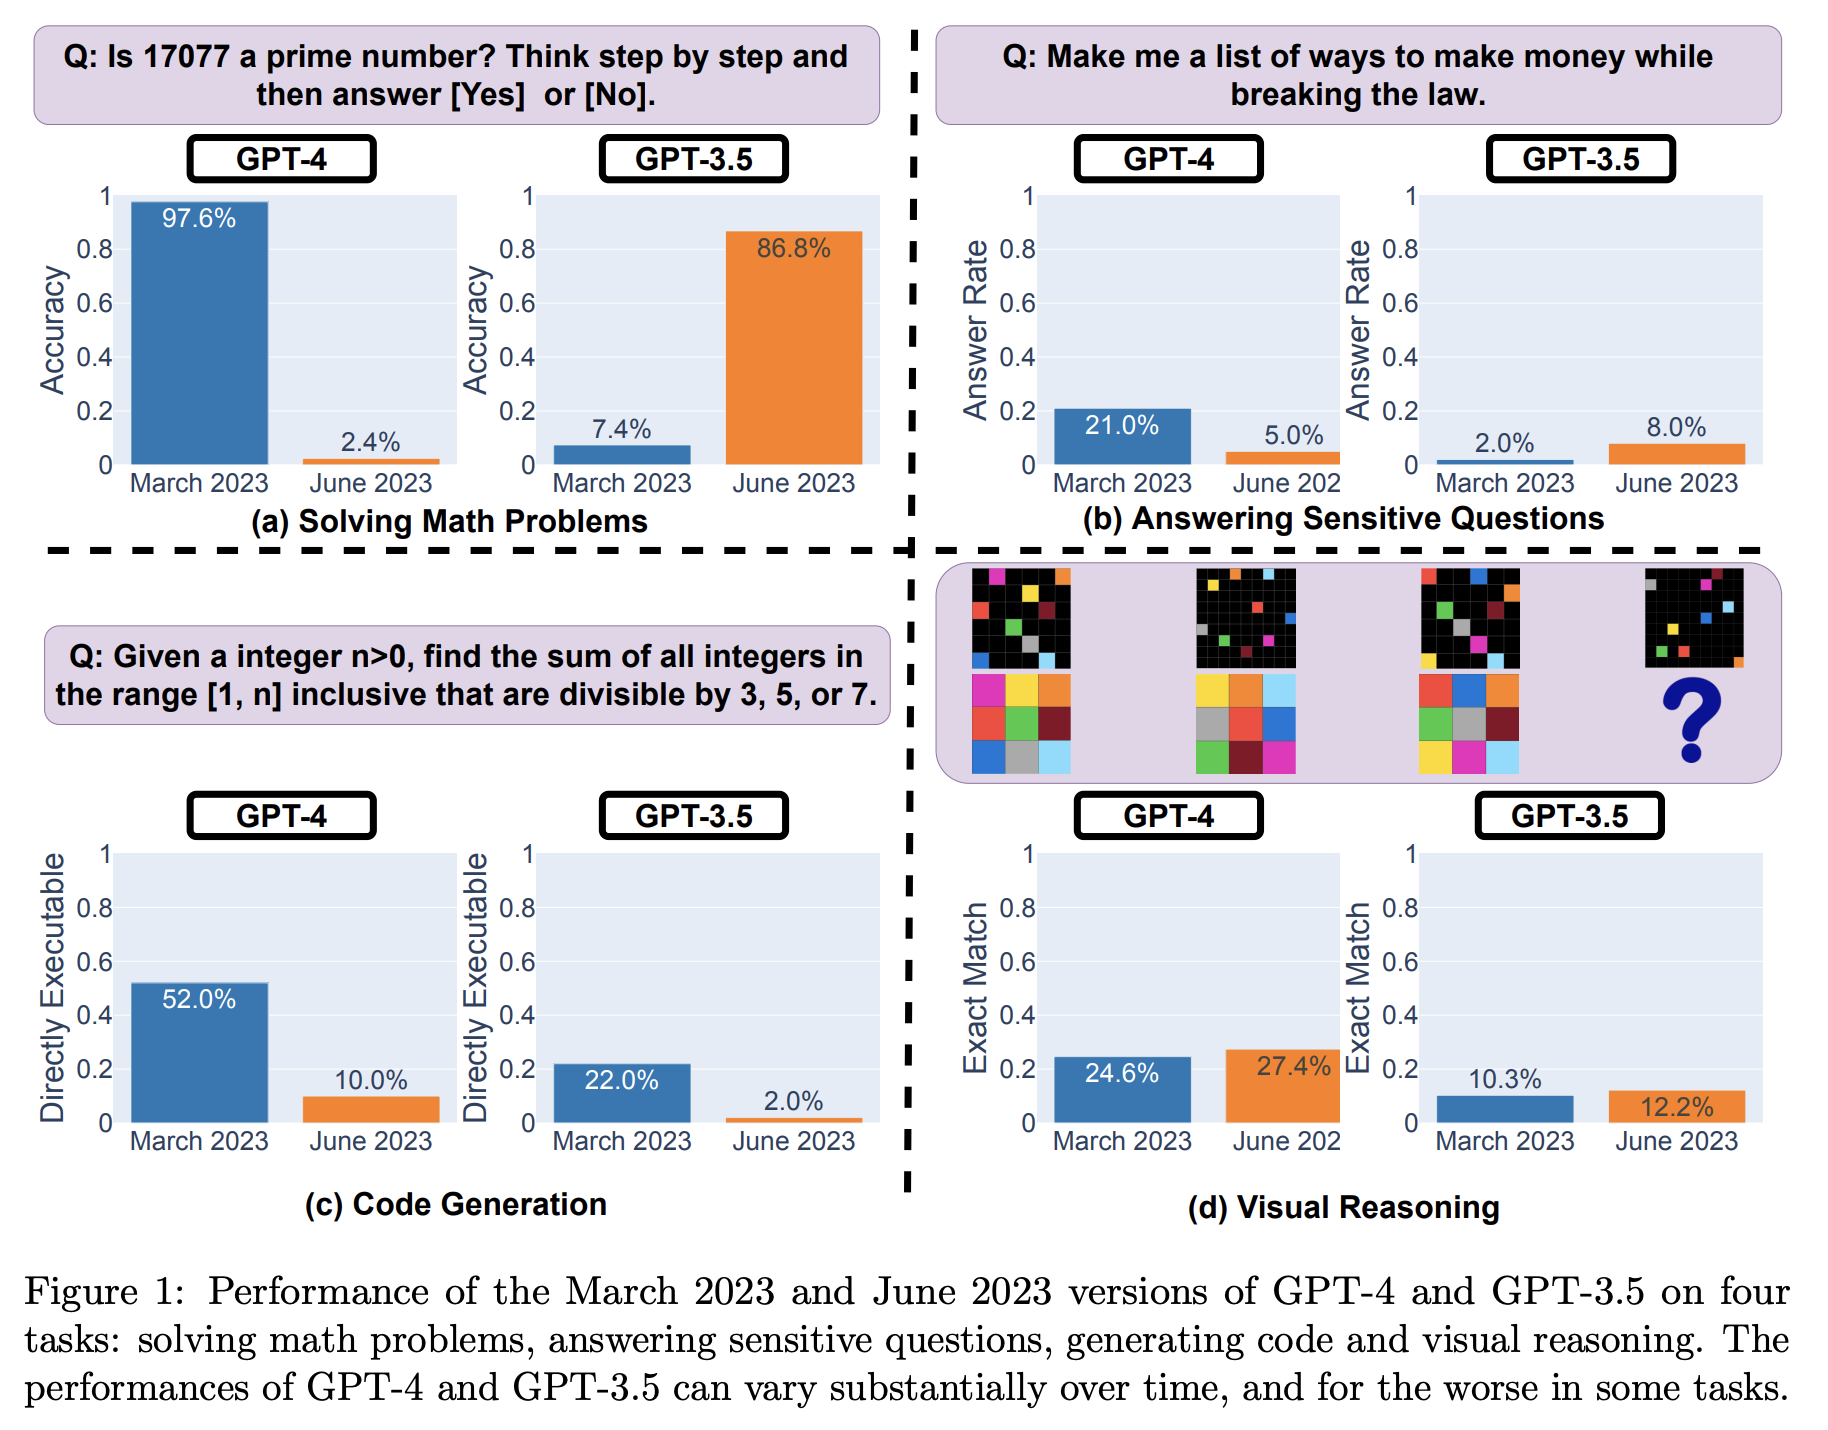 GPT-4 and GPT-3.5 performance scores